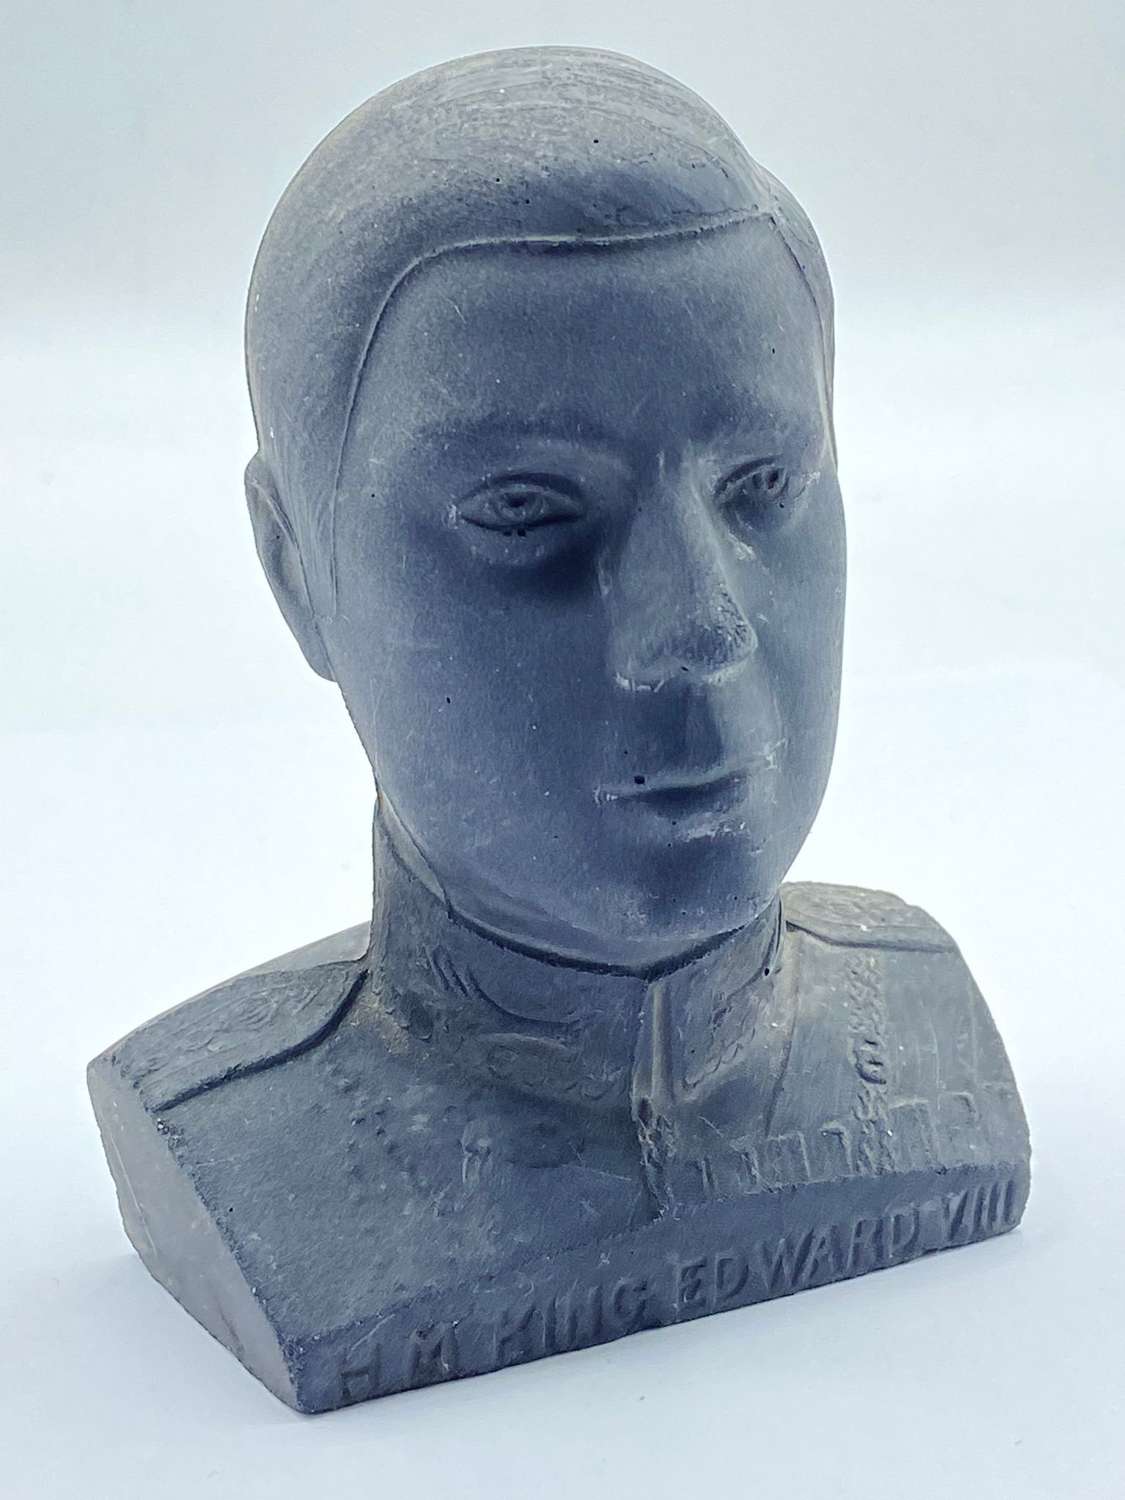 Rare Pre WW2 Black Plaster Bust Of Abdicated King Edward VIII